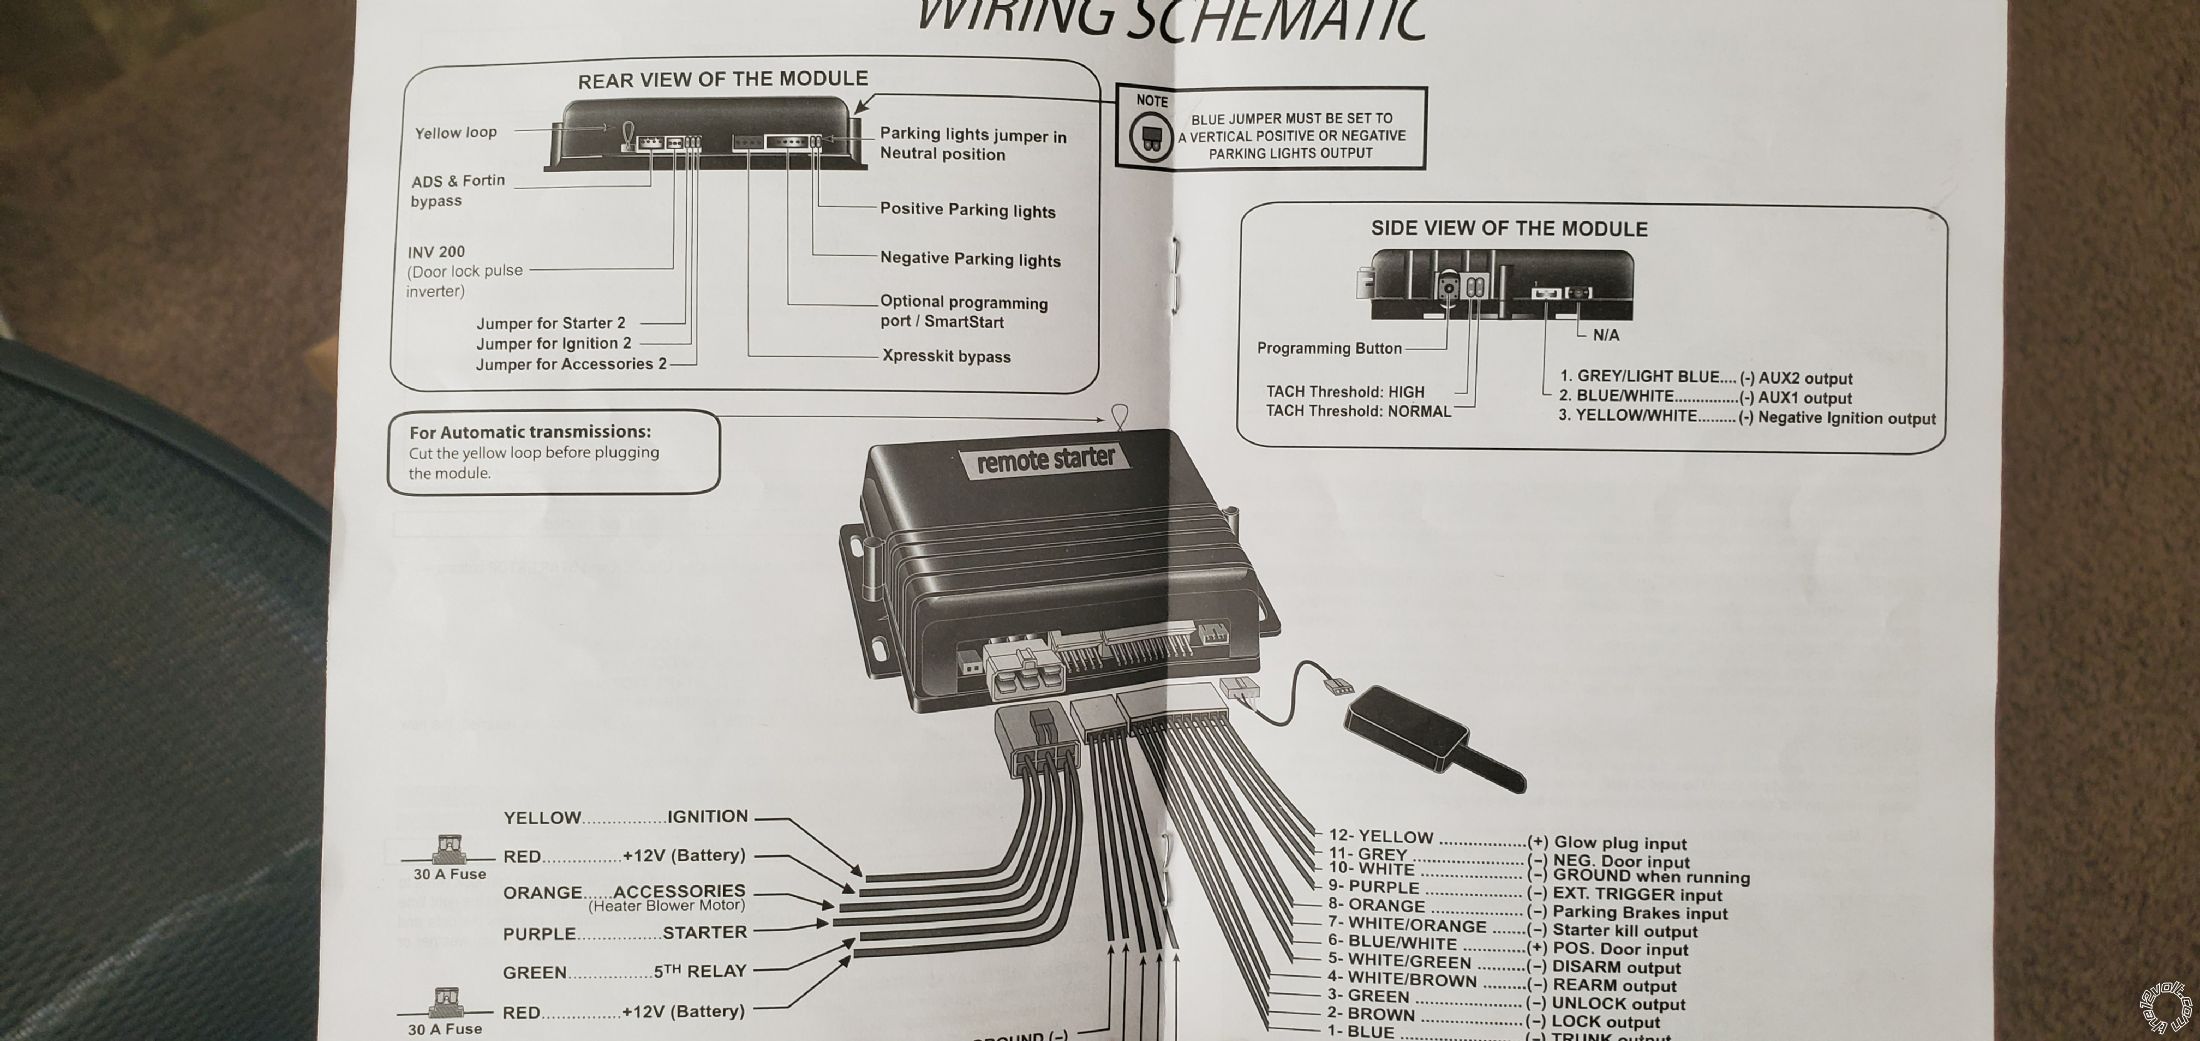 BMW E39 Remote Starter Wiring Confusion  Wiring Diagram E39 Ignition    The12Volt